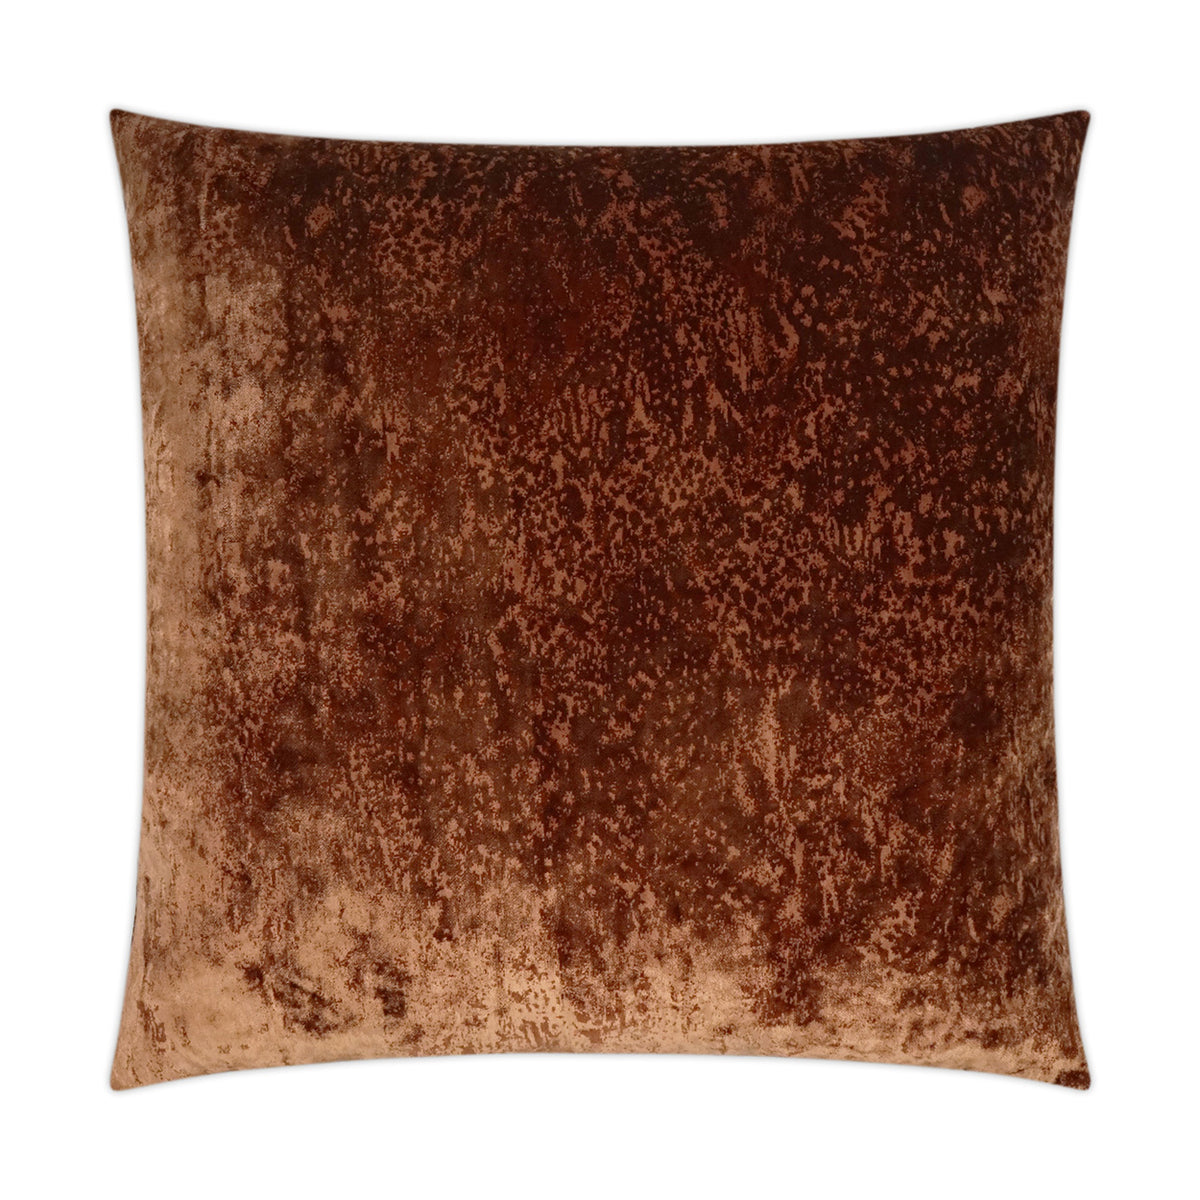 GRATED COPPER COIN PILLOW